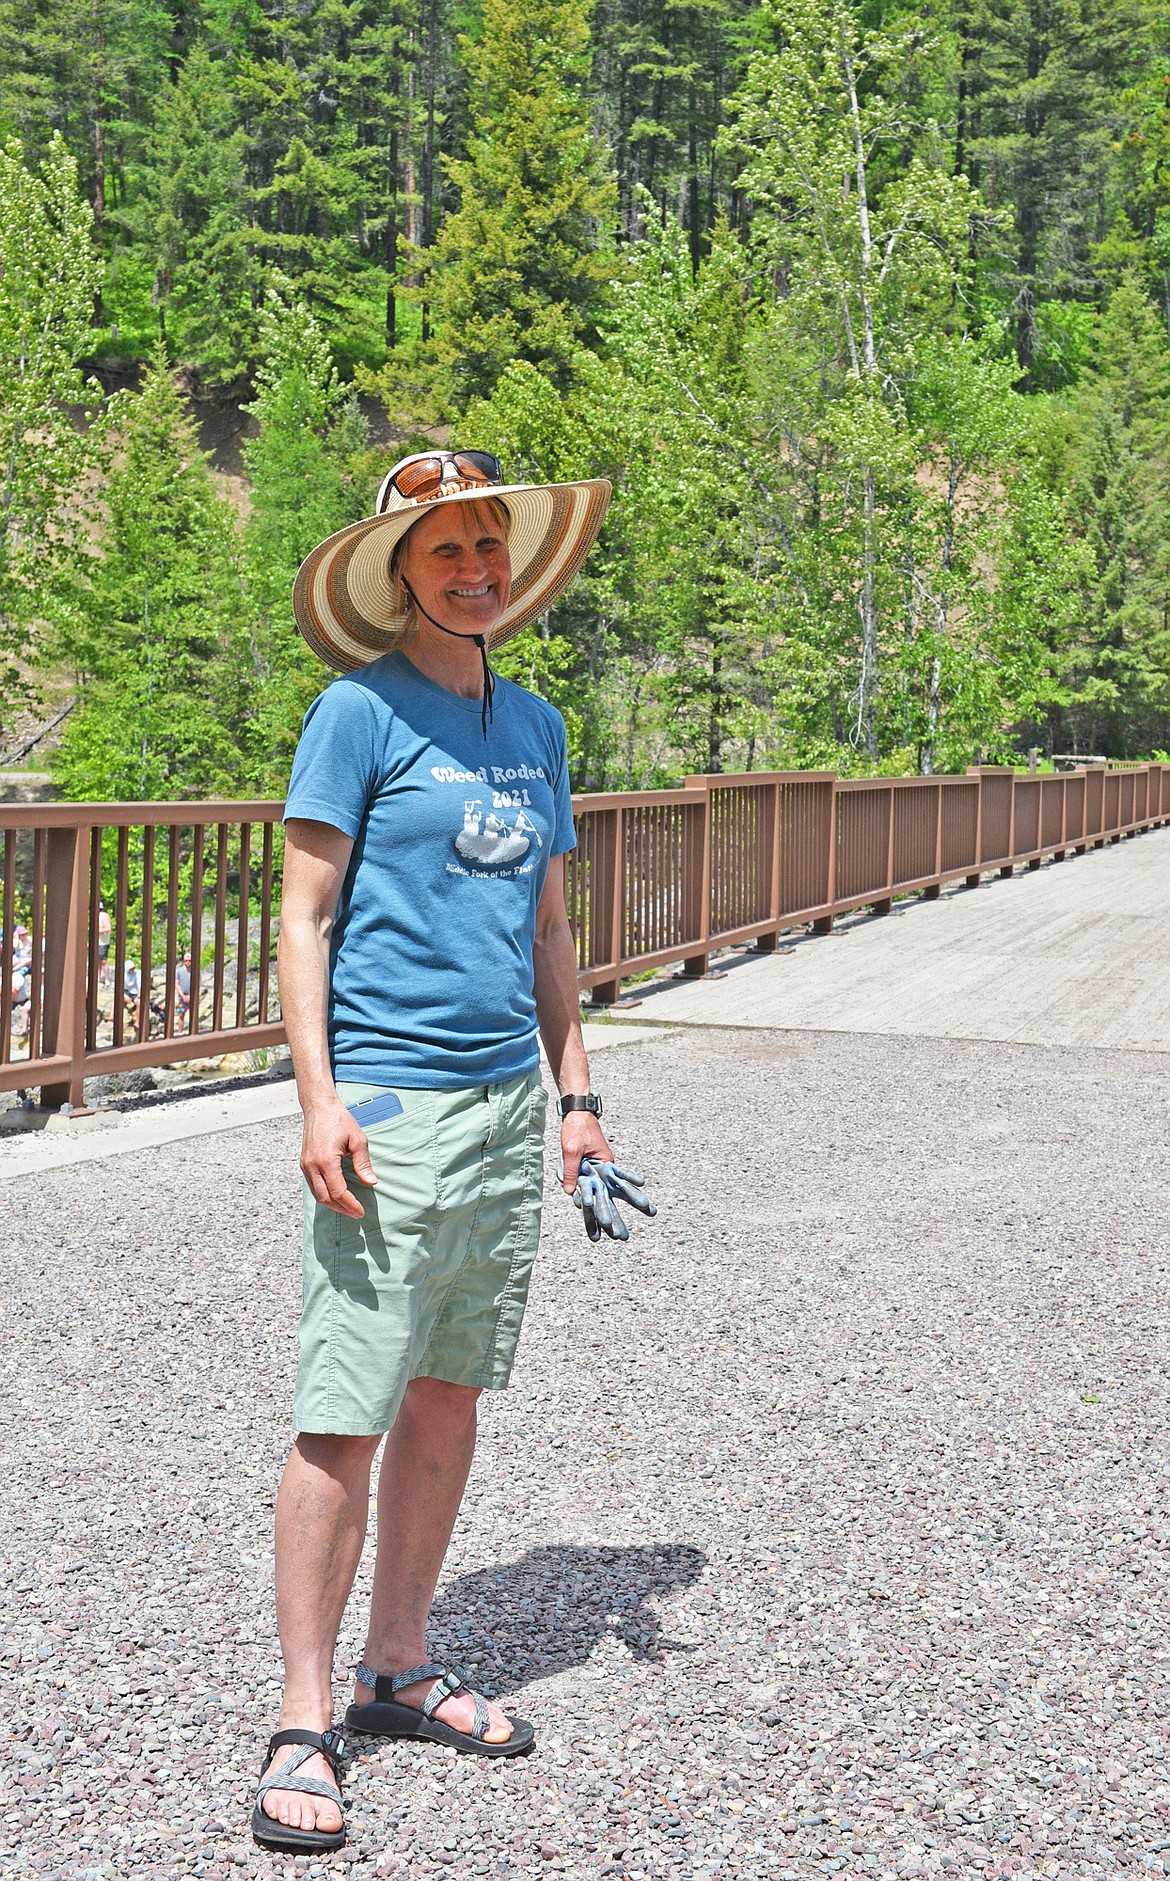 Brenda Guzman, founder of the Weed Rodeo, greets volunteers and prepares to pull weeds along the Flathead River. (Julie Engler/Whitefish Pilot)